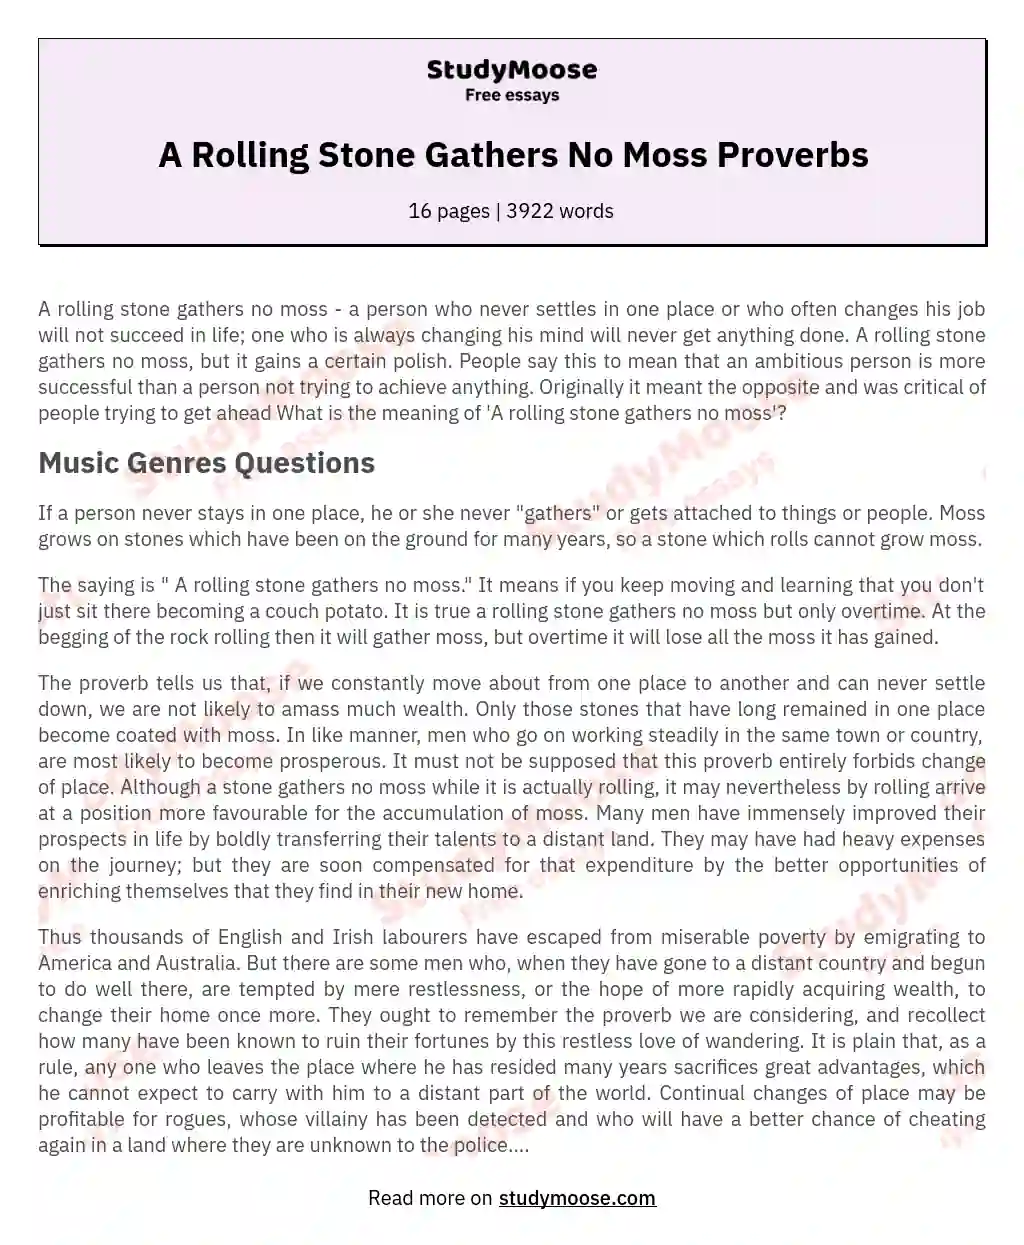 A Rolling Stone Gathers No Moss Proverbs